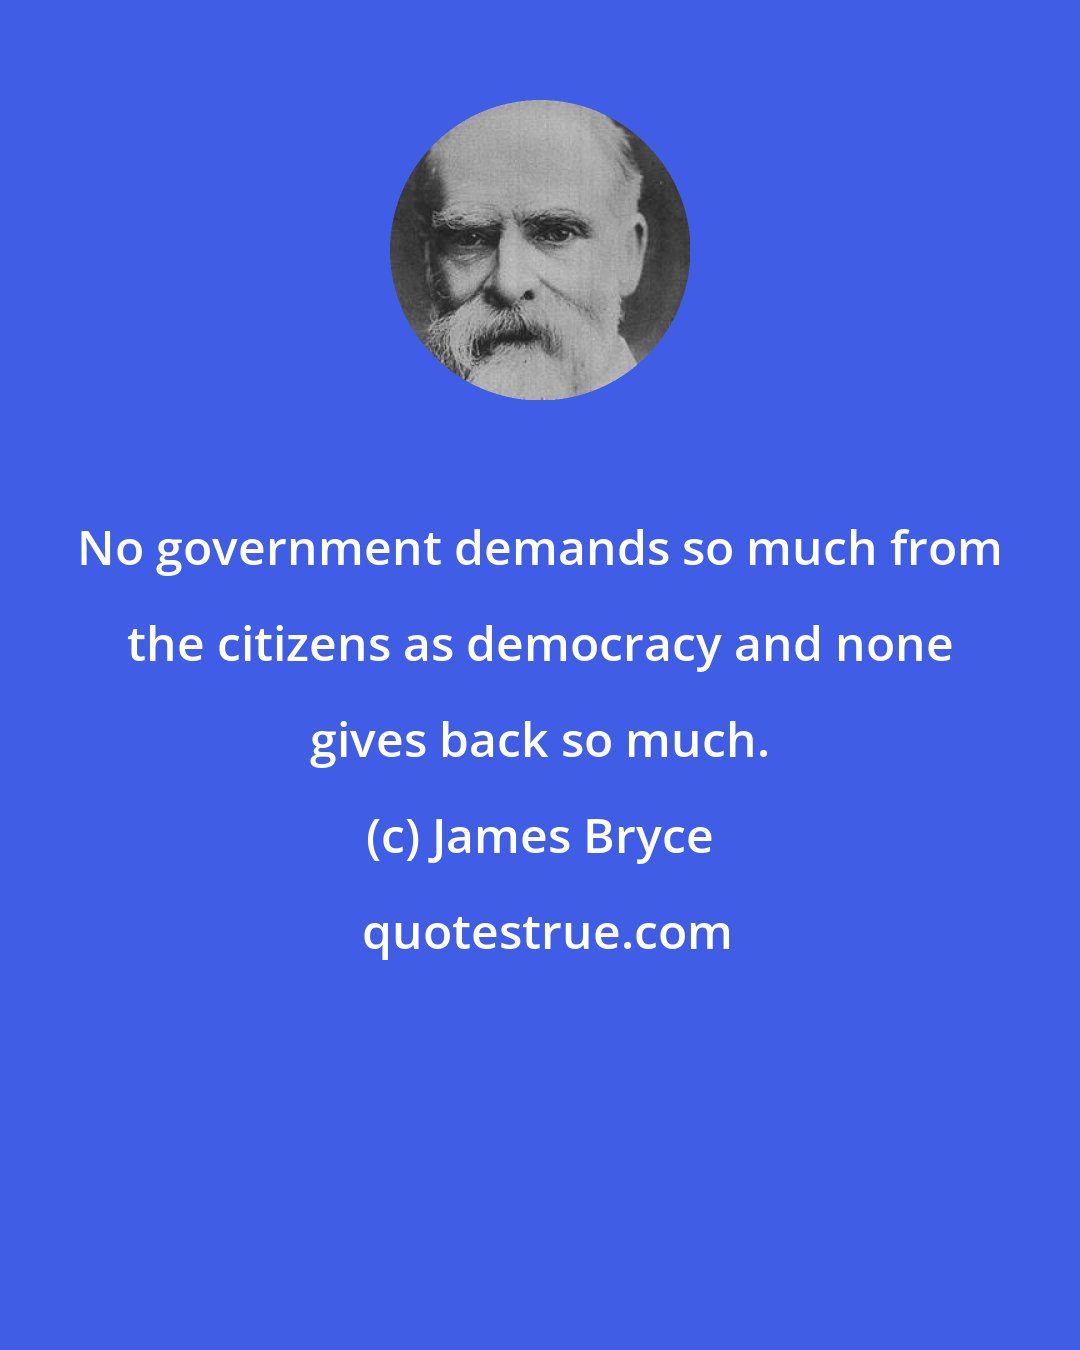 James Bryce: No government demands so much from the citizens as democracy and none gives back so much.